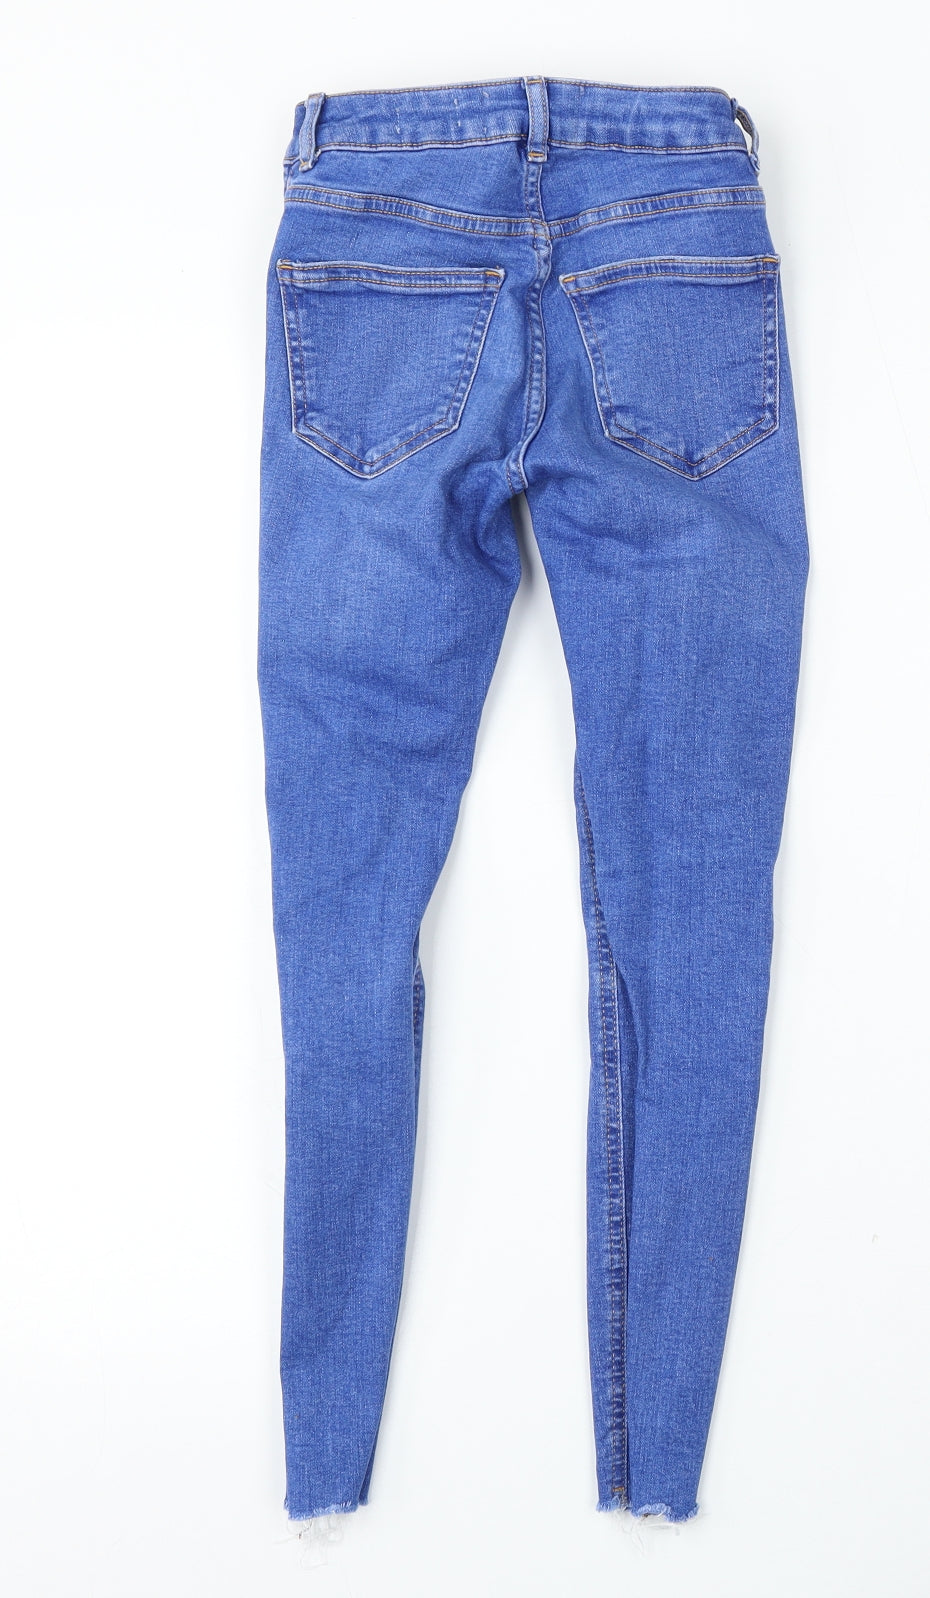 New Look Girls Blue  Cotton Skinny Jeans Size 9 Years  Regular